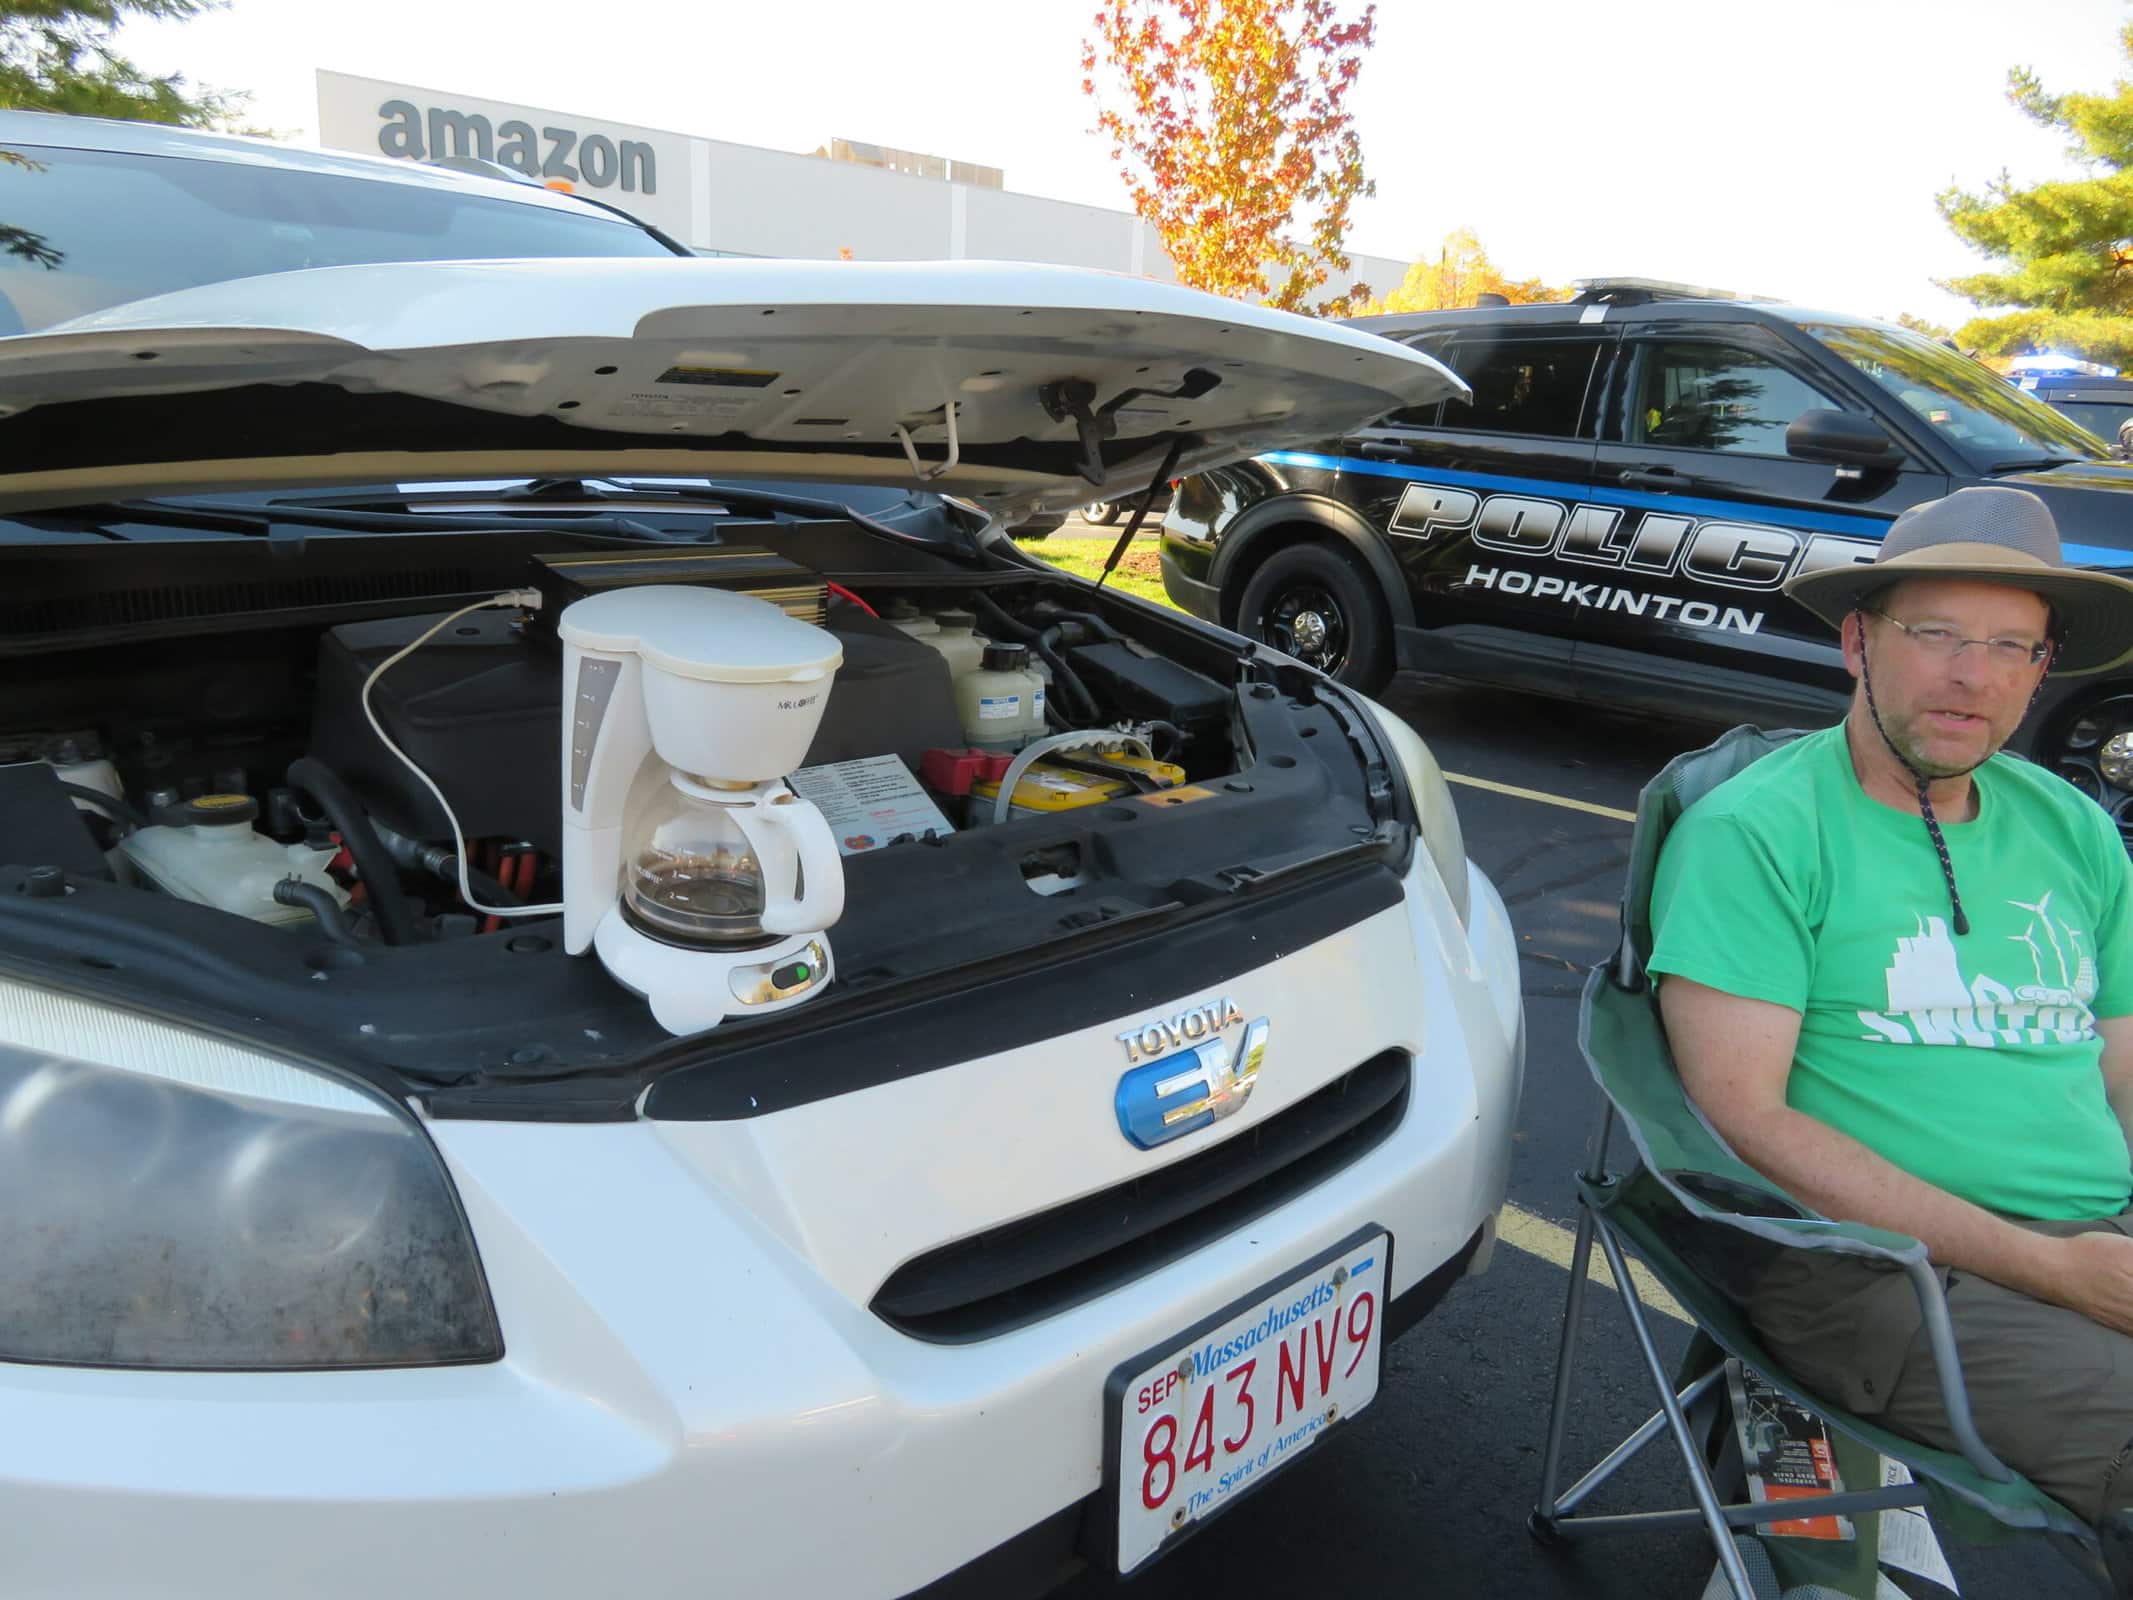 Electric vehicle enthusiasts plug into expo in Westborough